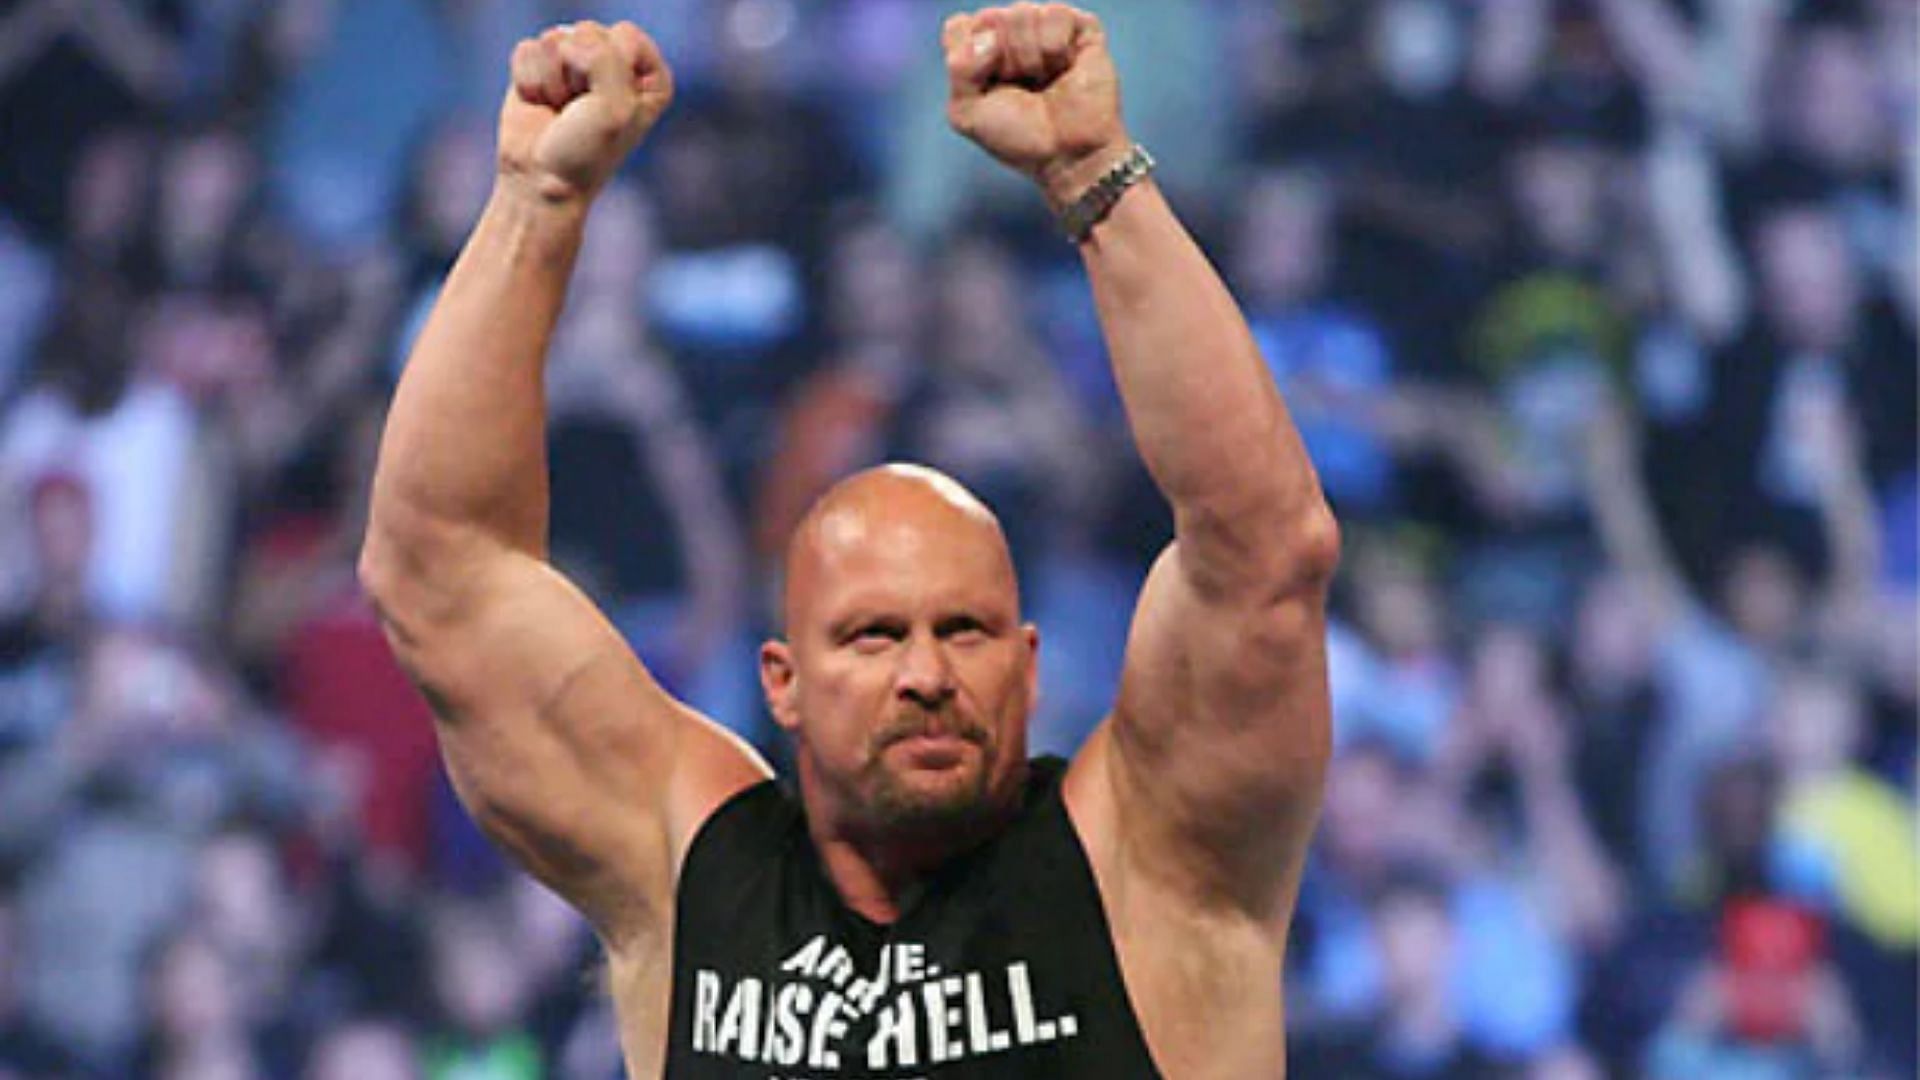 Stone Cold returned to WWE at WrestleMania 38 to fight Kevin Owens